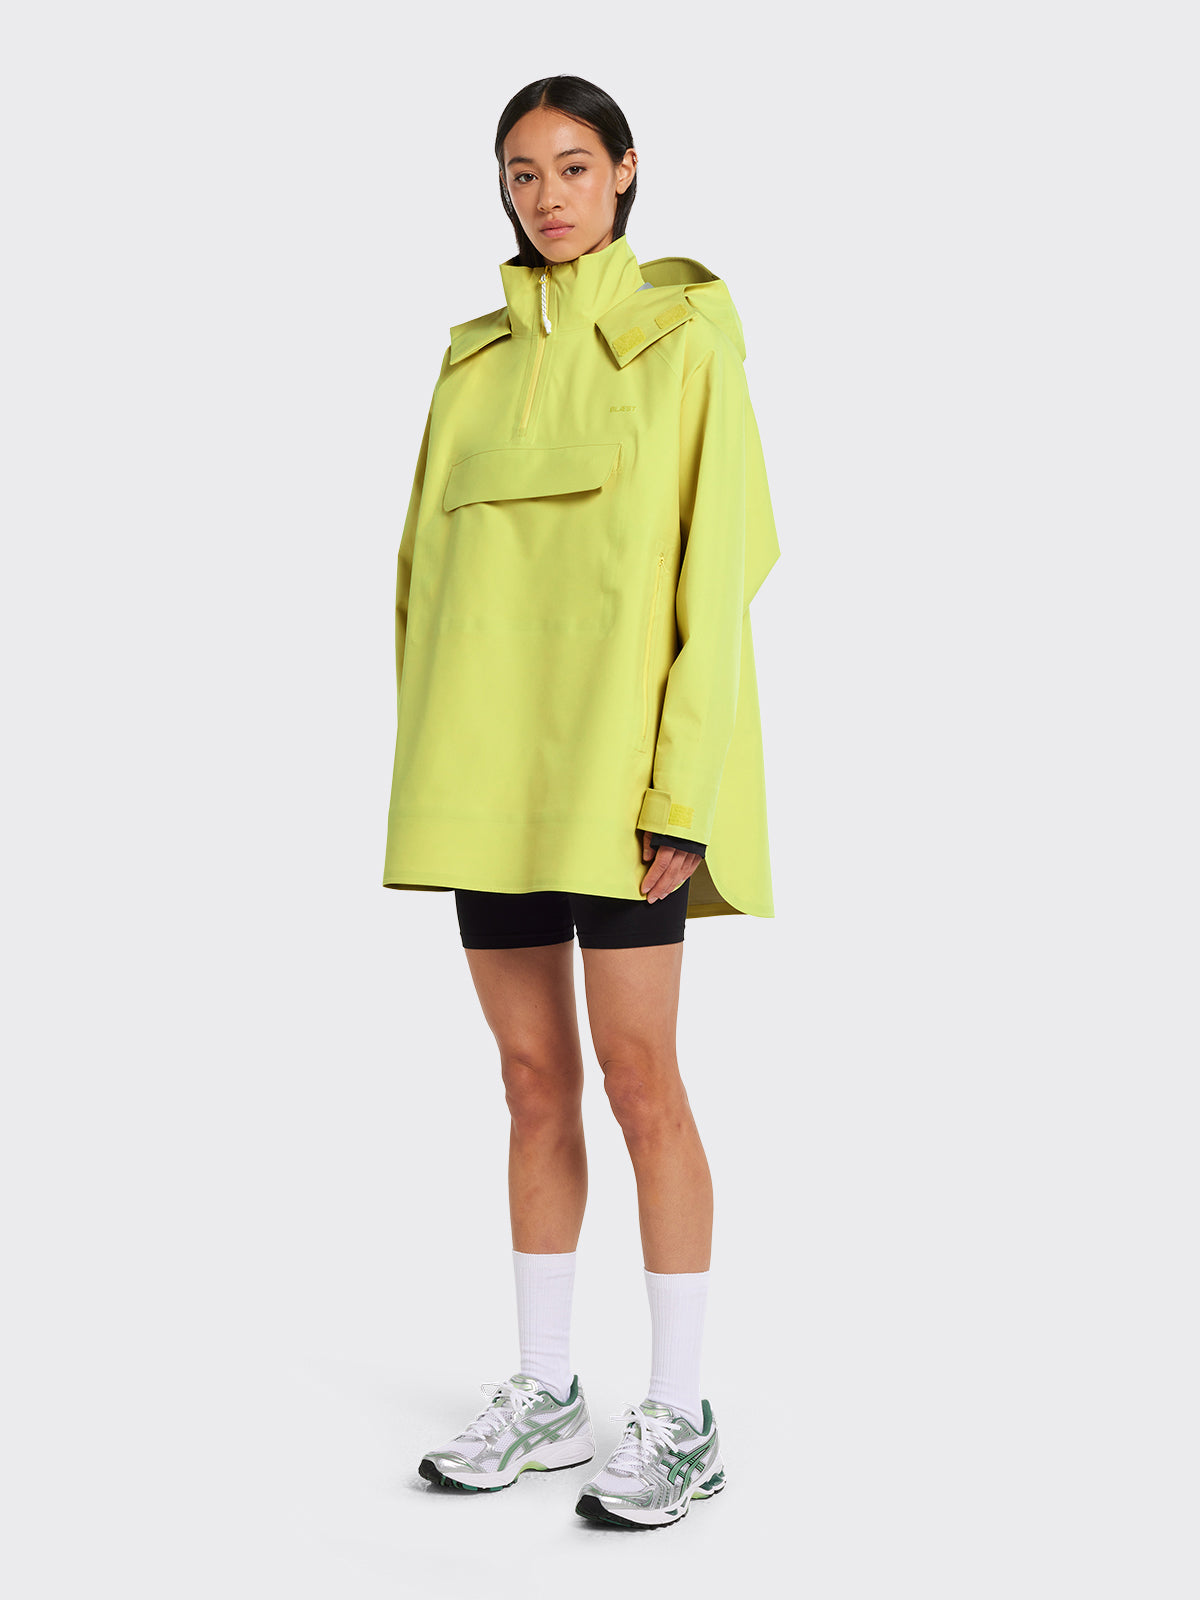 Woman dressed in Voss poncho by Blæst in Muted Lime